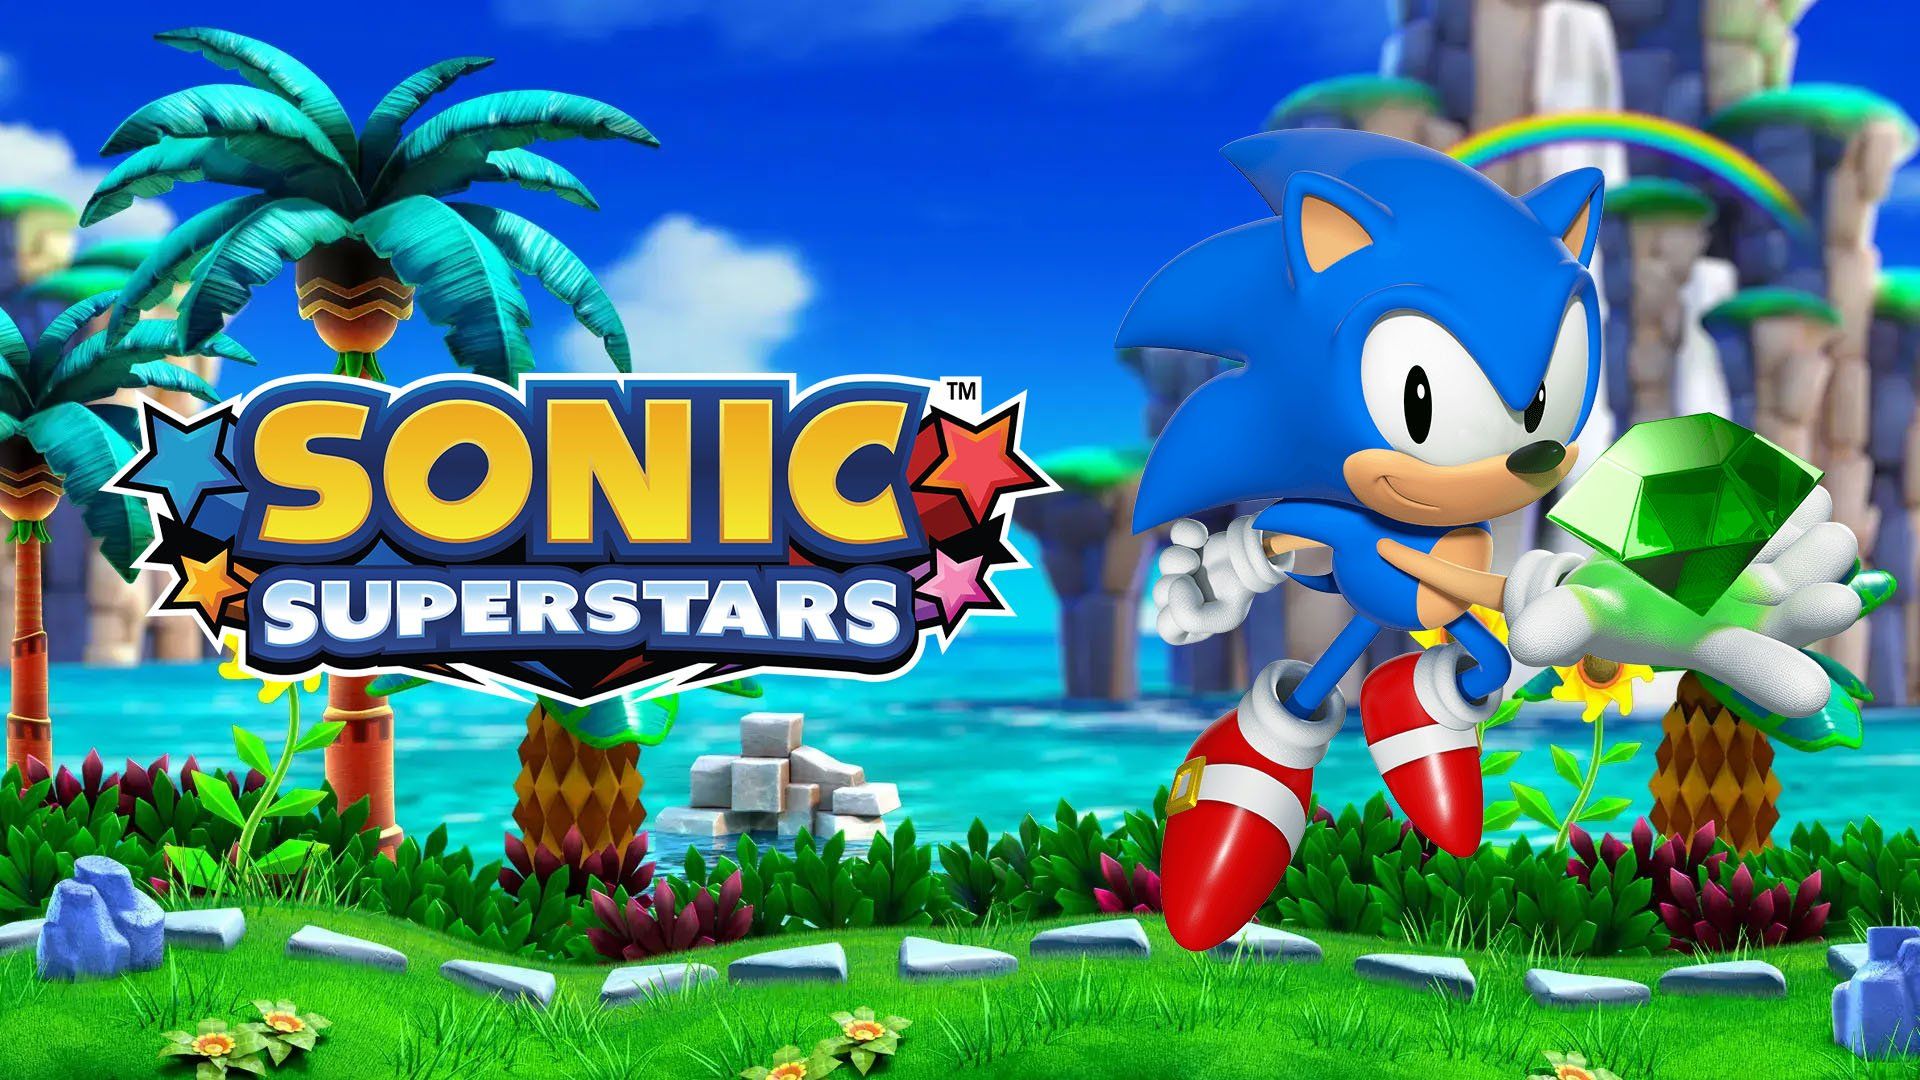 Sonic Superstars is Launching in October, as Per Retailer Listings